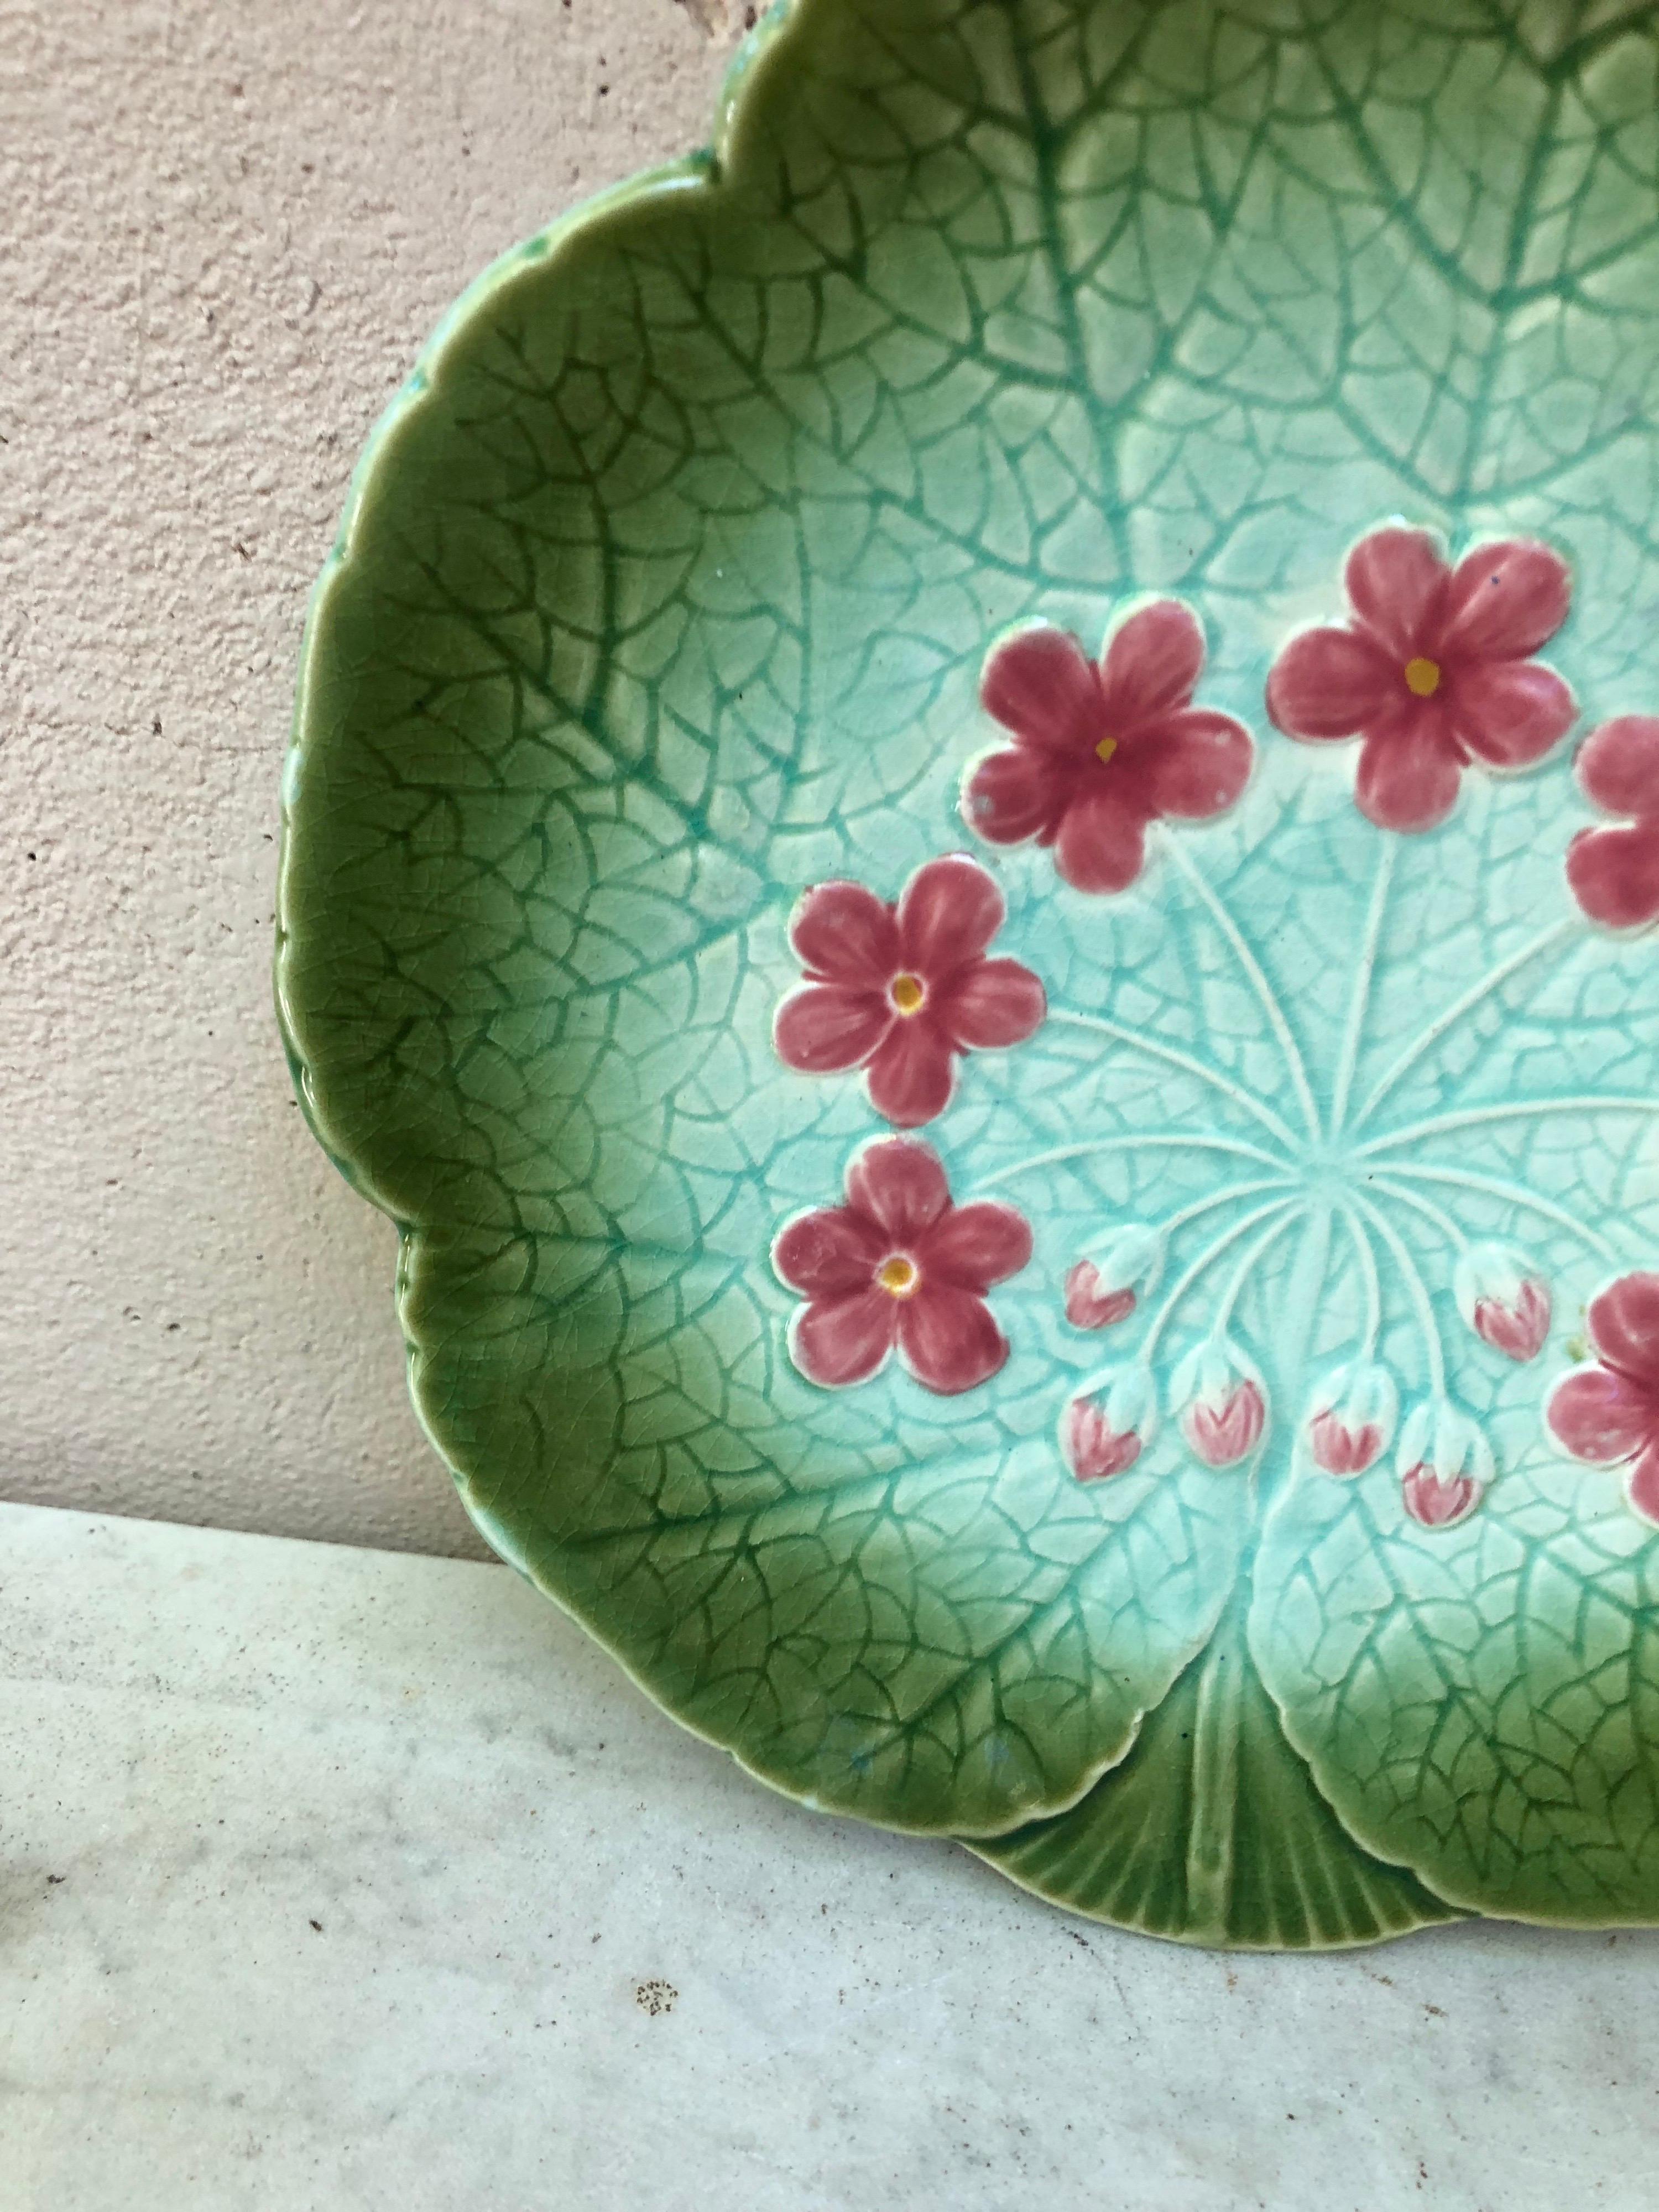 Majolica flower plate signed Sarreguemines, circa 1890.
In a leaf shape with pink flowers.